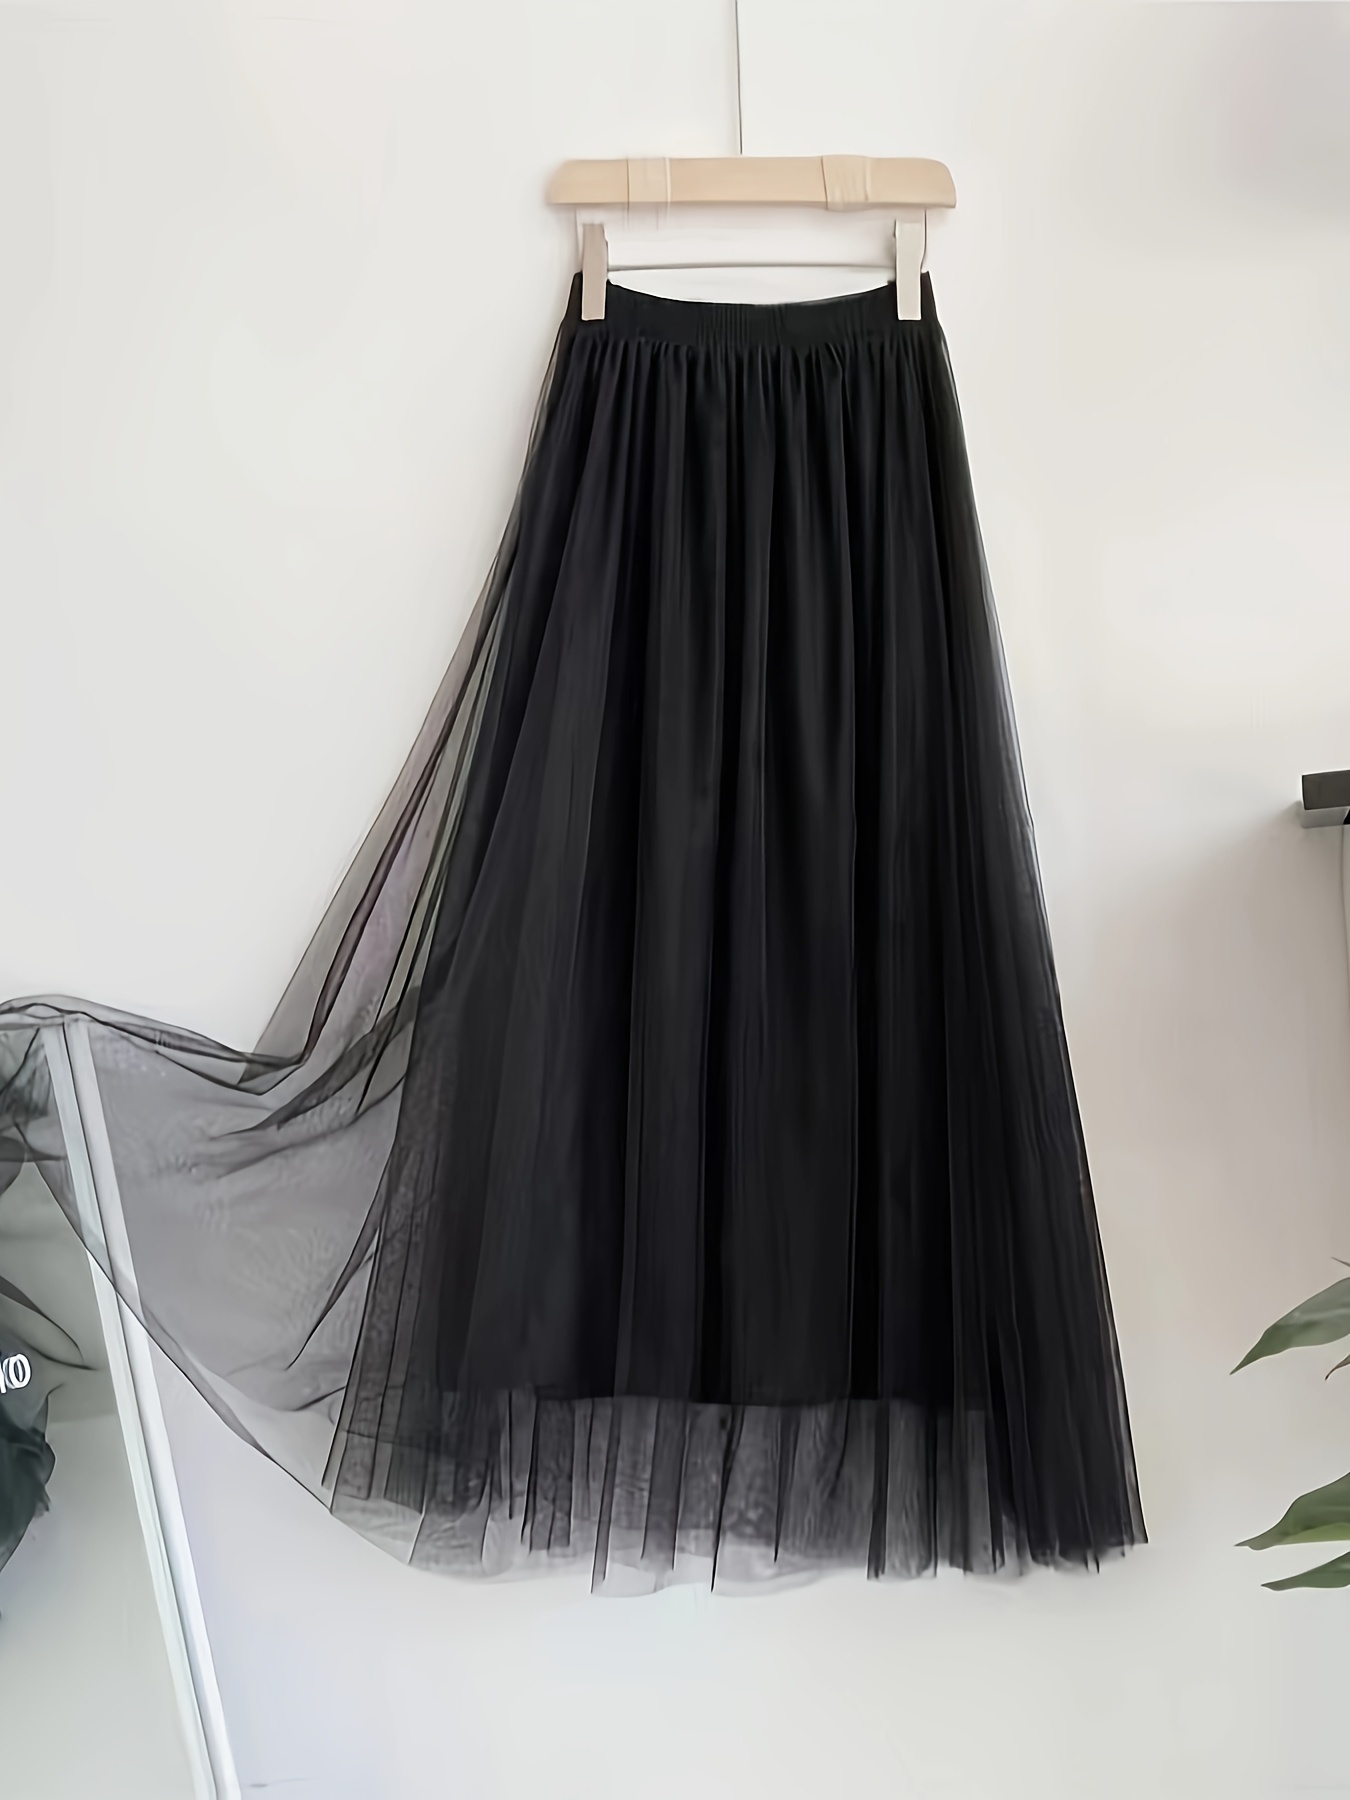 Solid Color Layered Mesh Skirts for Women Stretchy High Waist